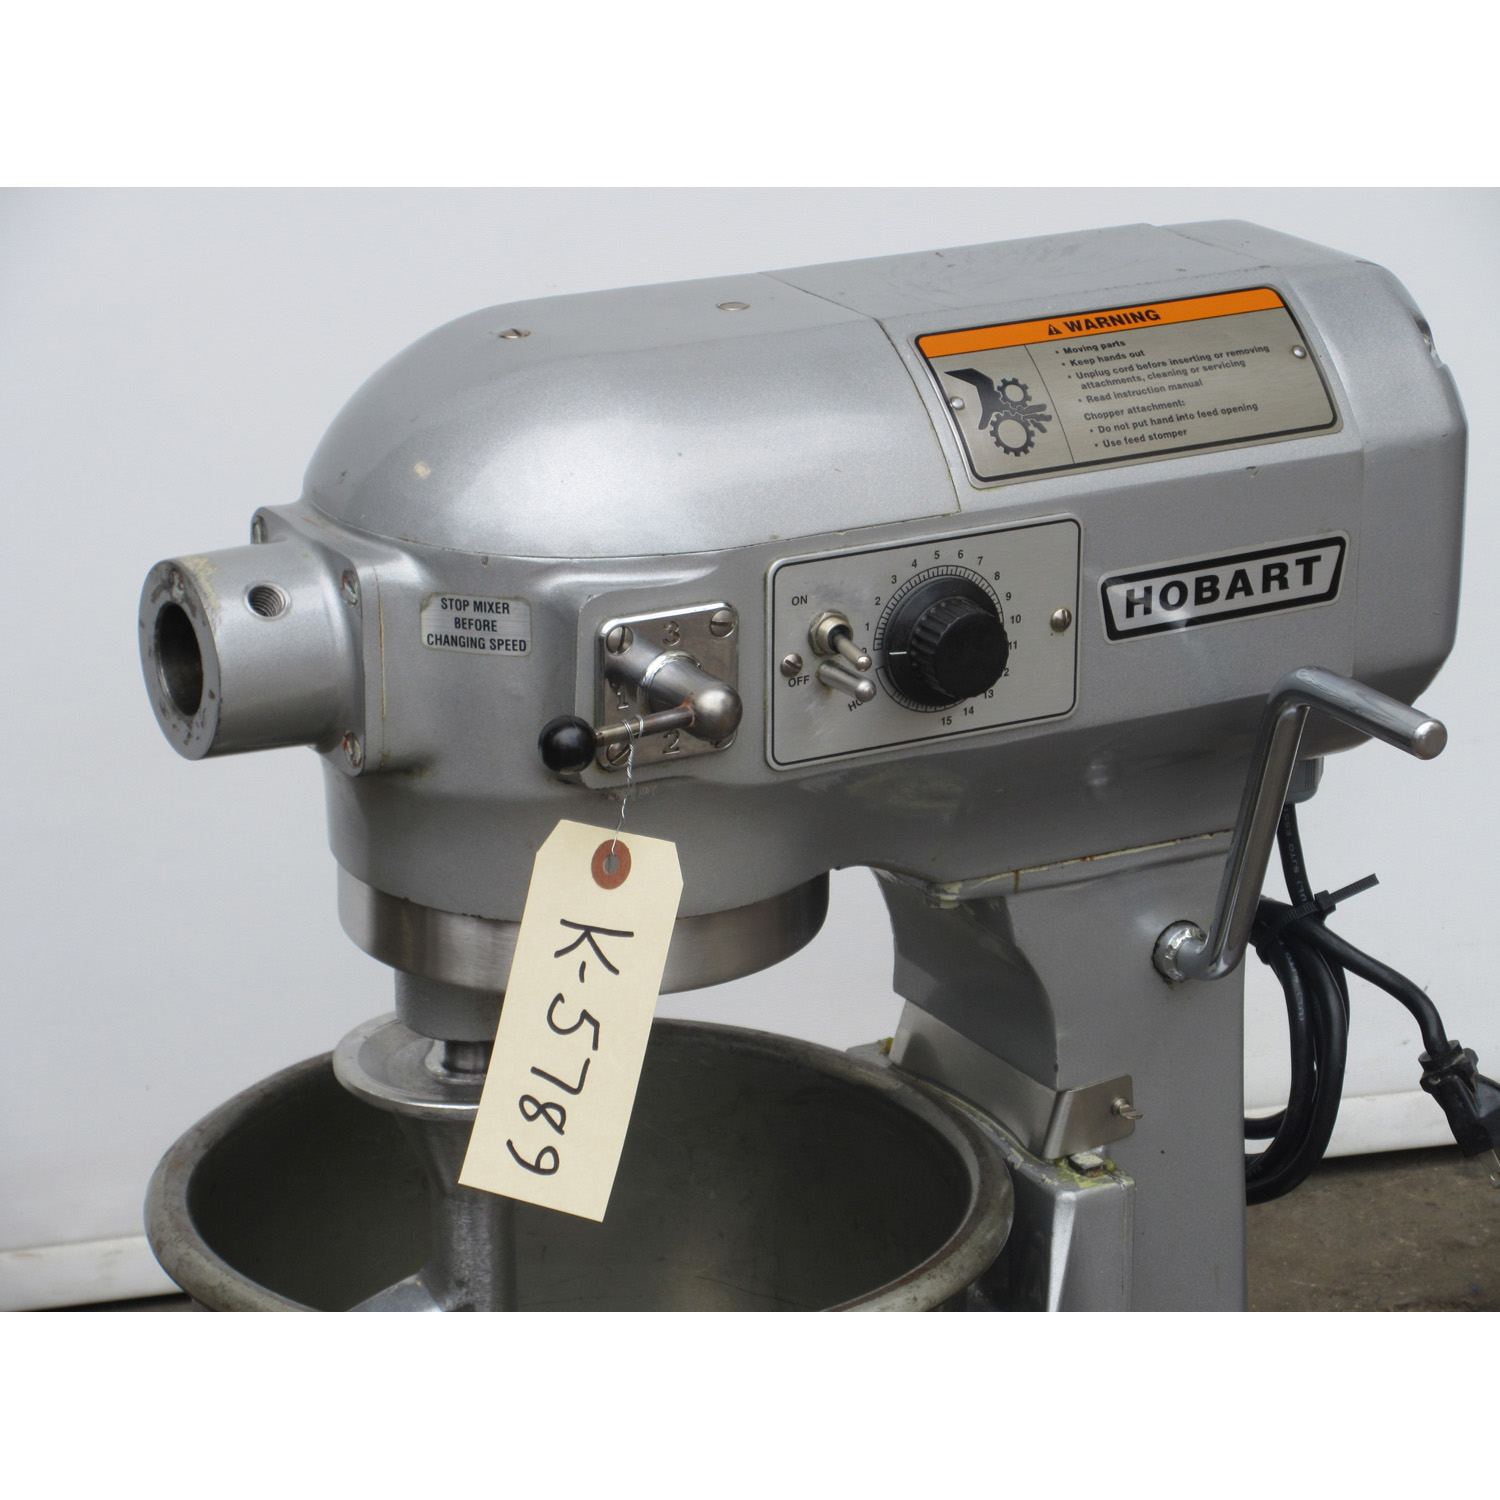 Hobart 12 Quart A120 Mixer, Used Excellent Condition image 2